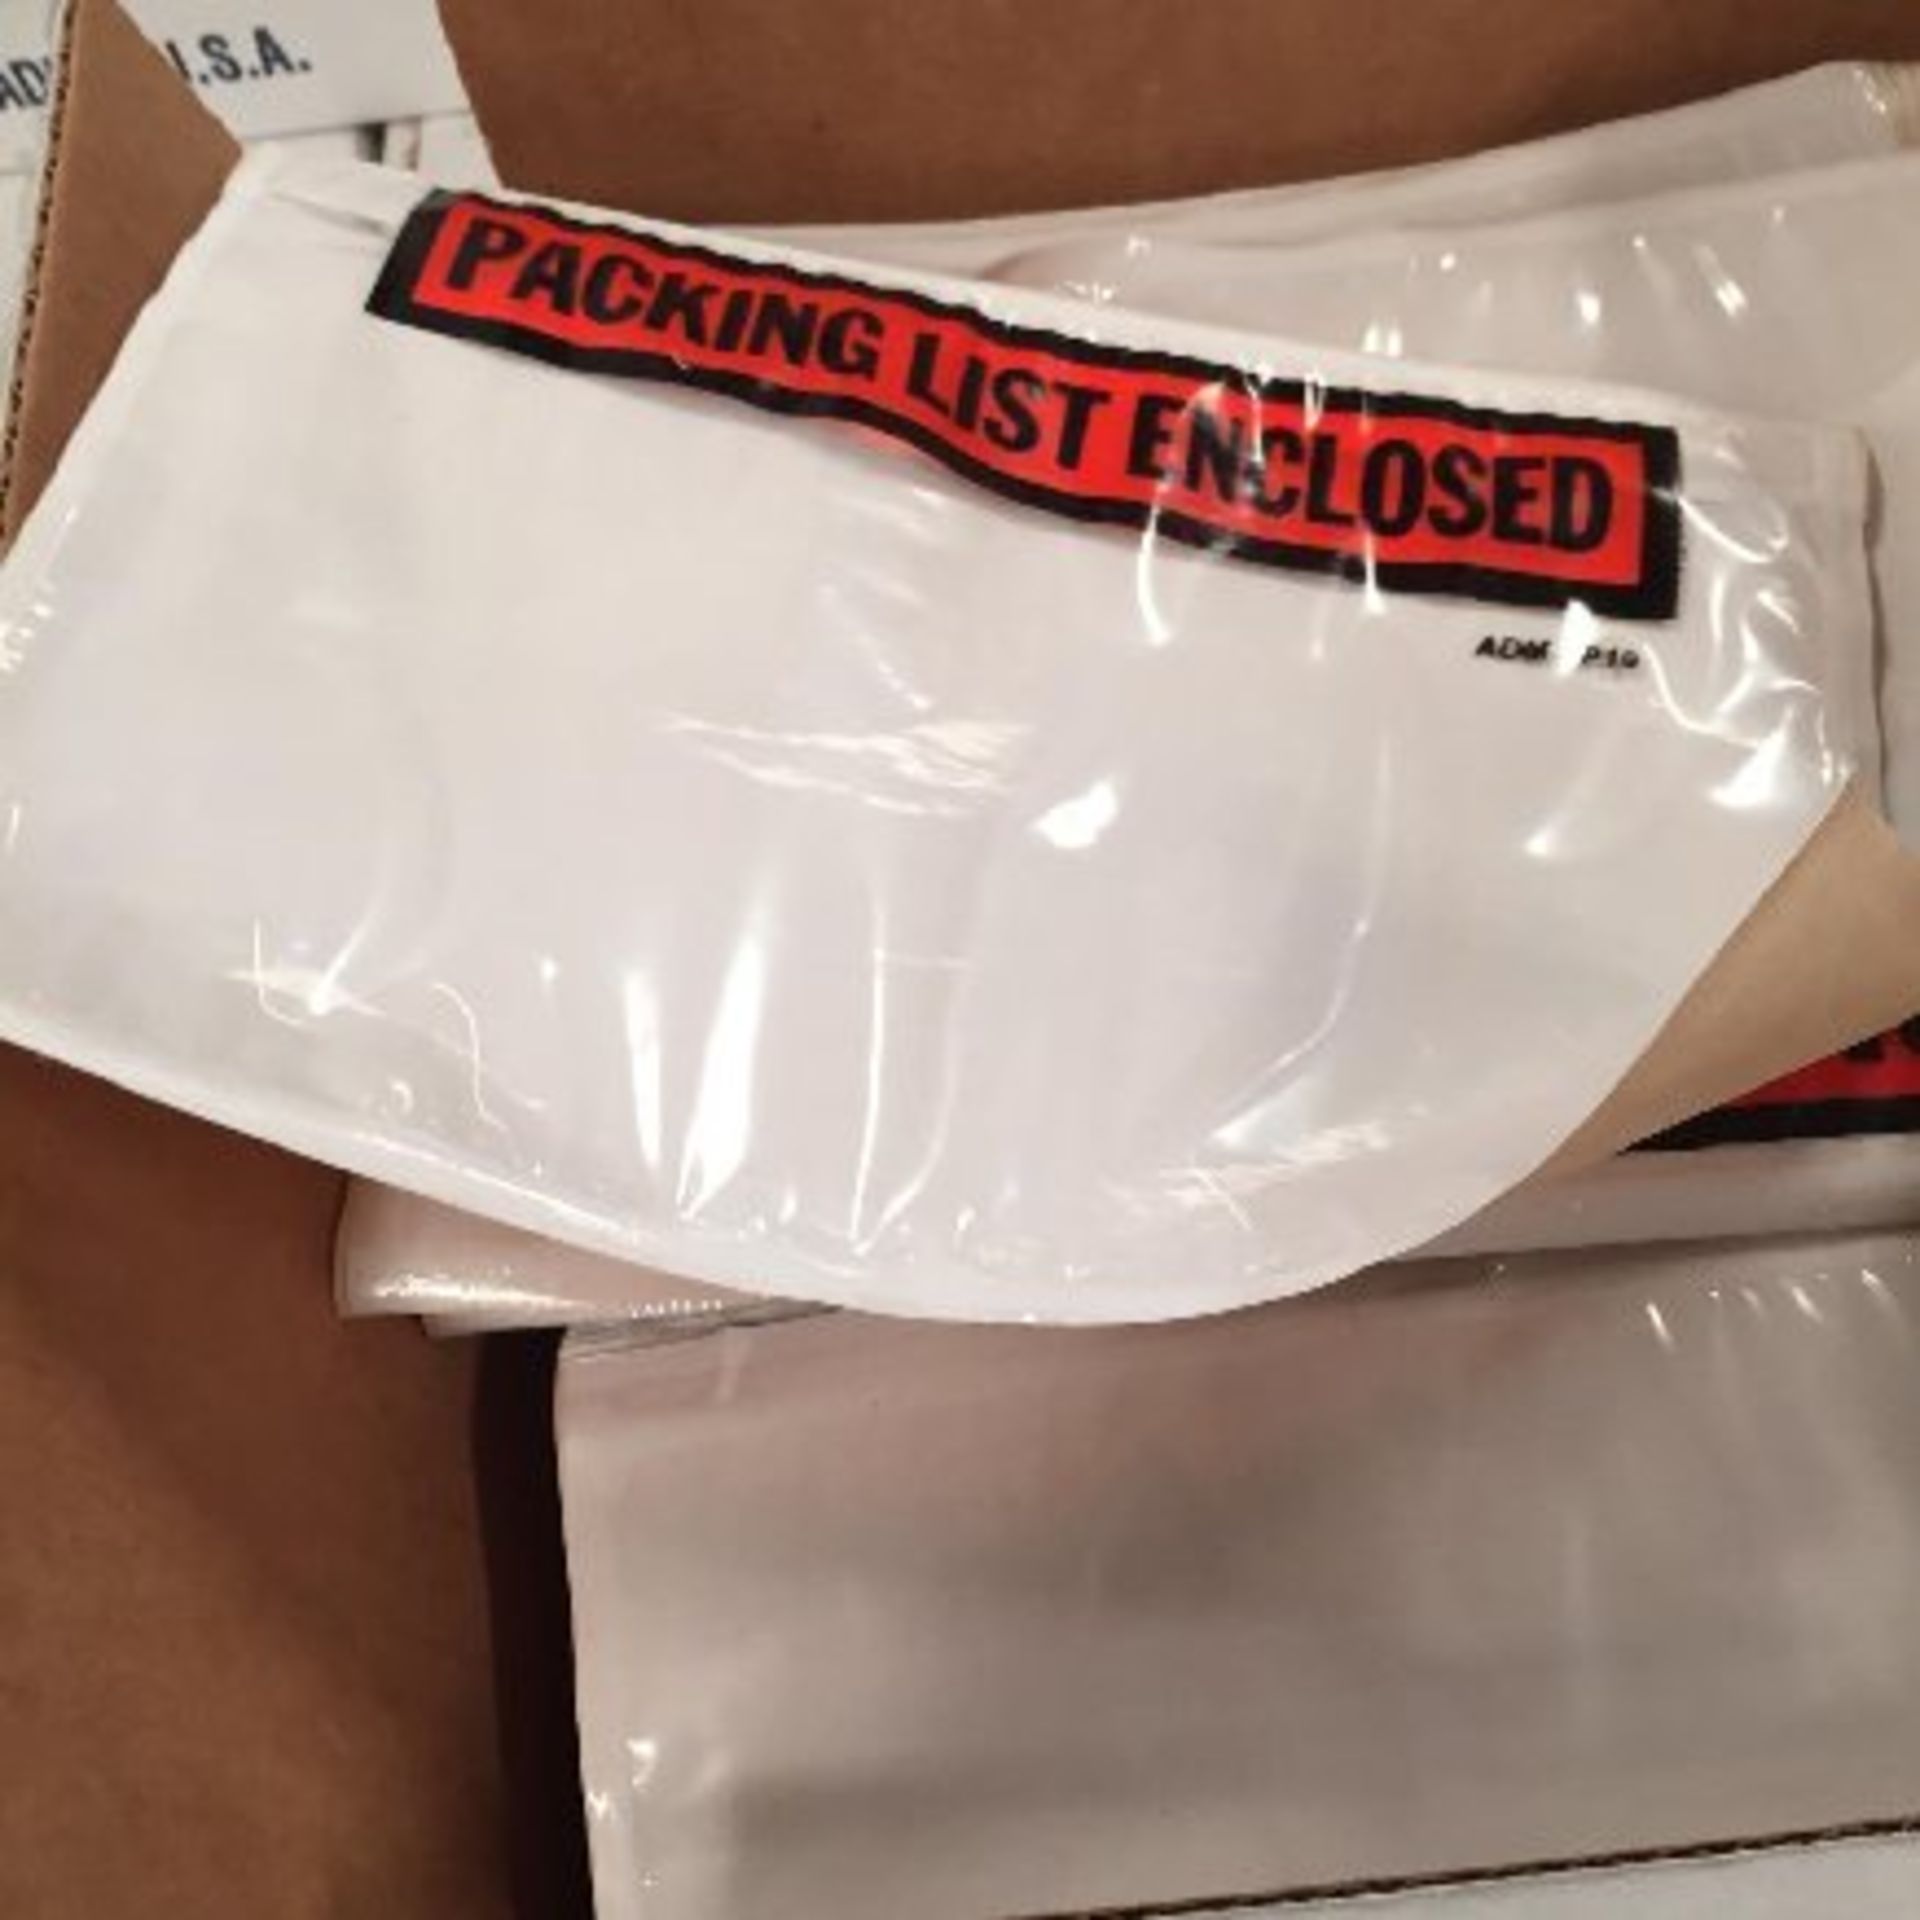 Assorted pressure sensitive packing list envelopes and paper.  Approx. 136,000 packing list